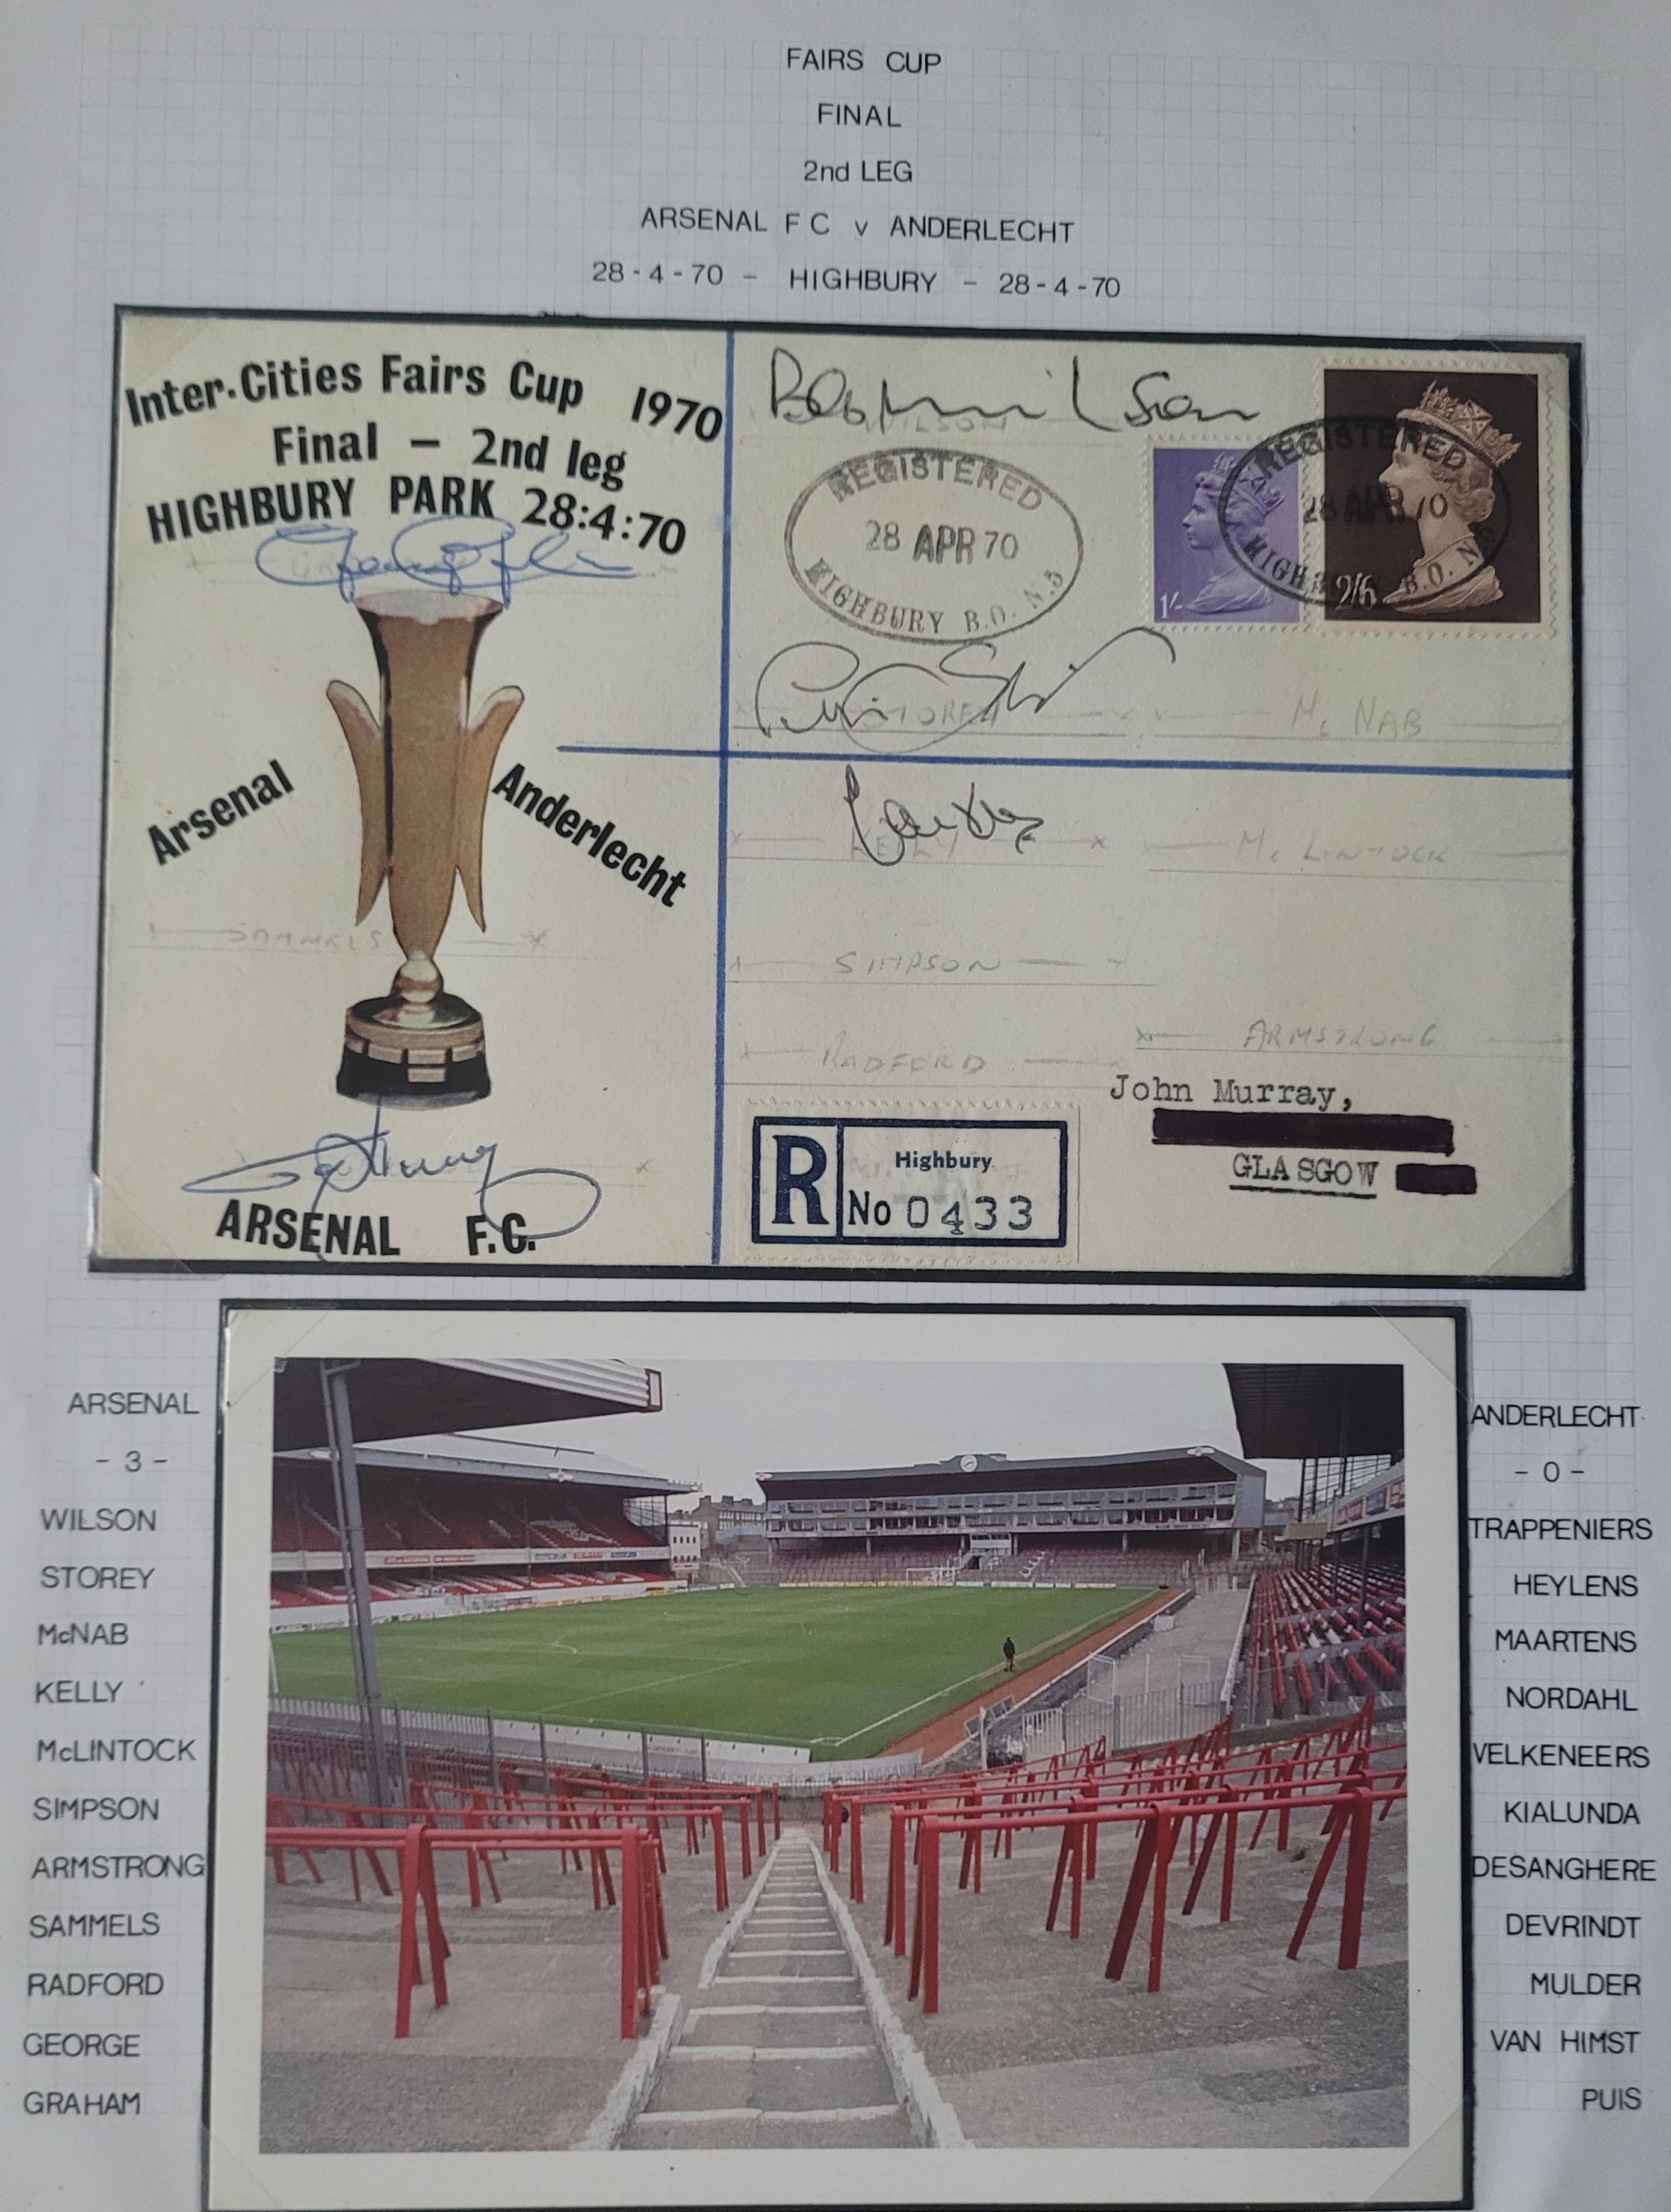 ARSENAL 1970 FAIRS CUP FINAL AUTOGRAPHED POSTAL COVER